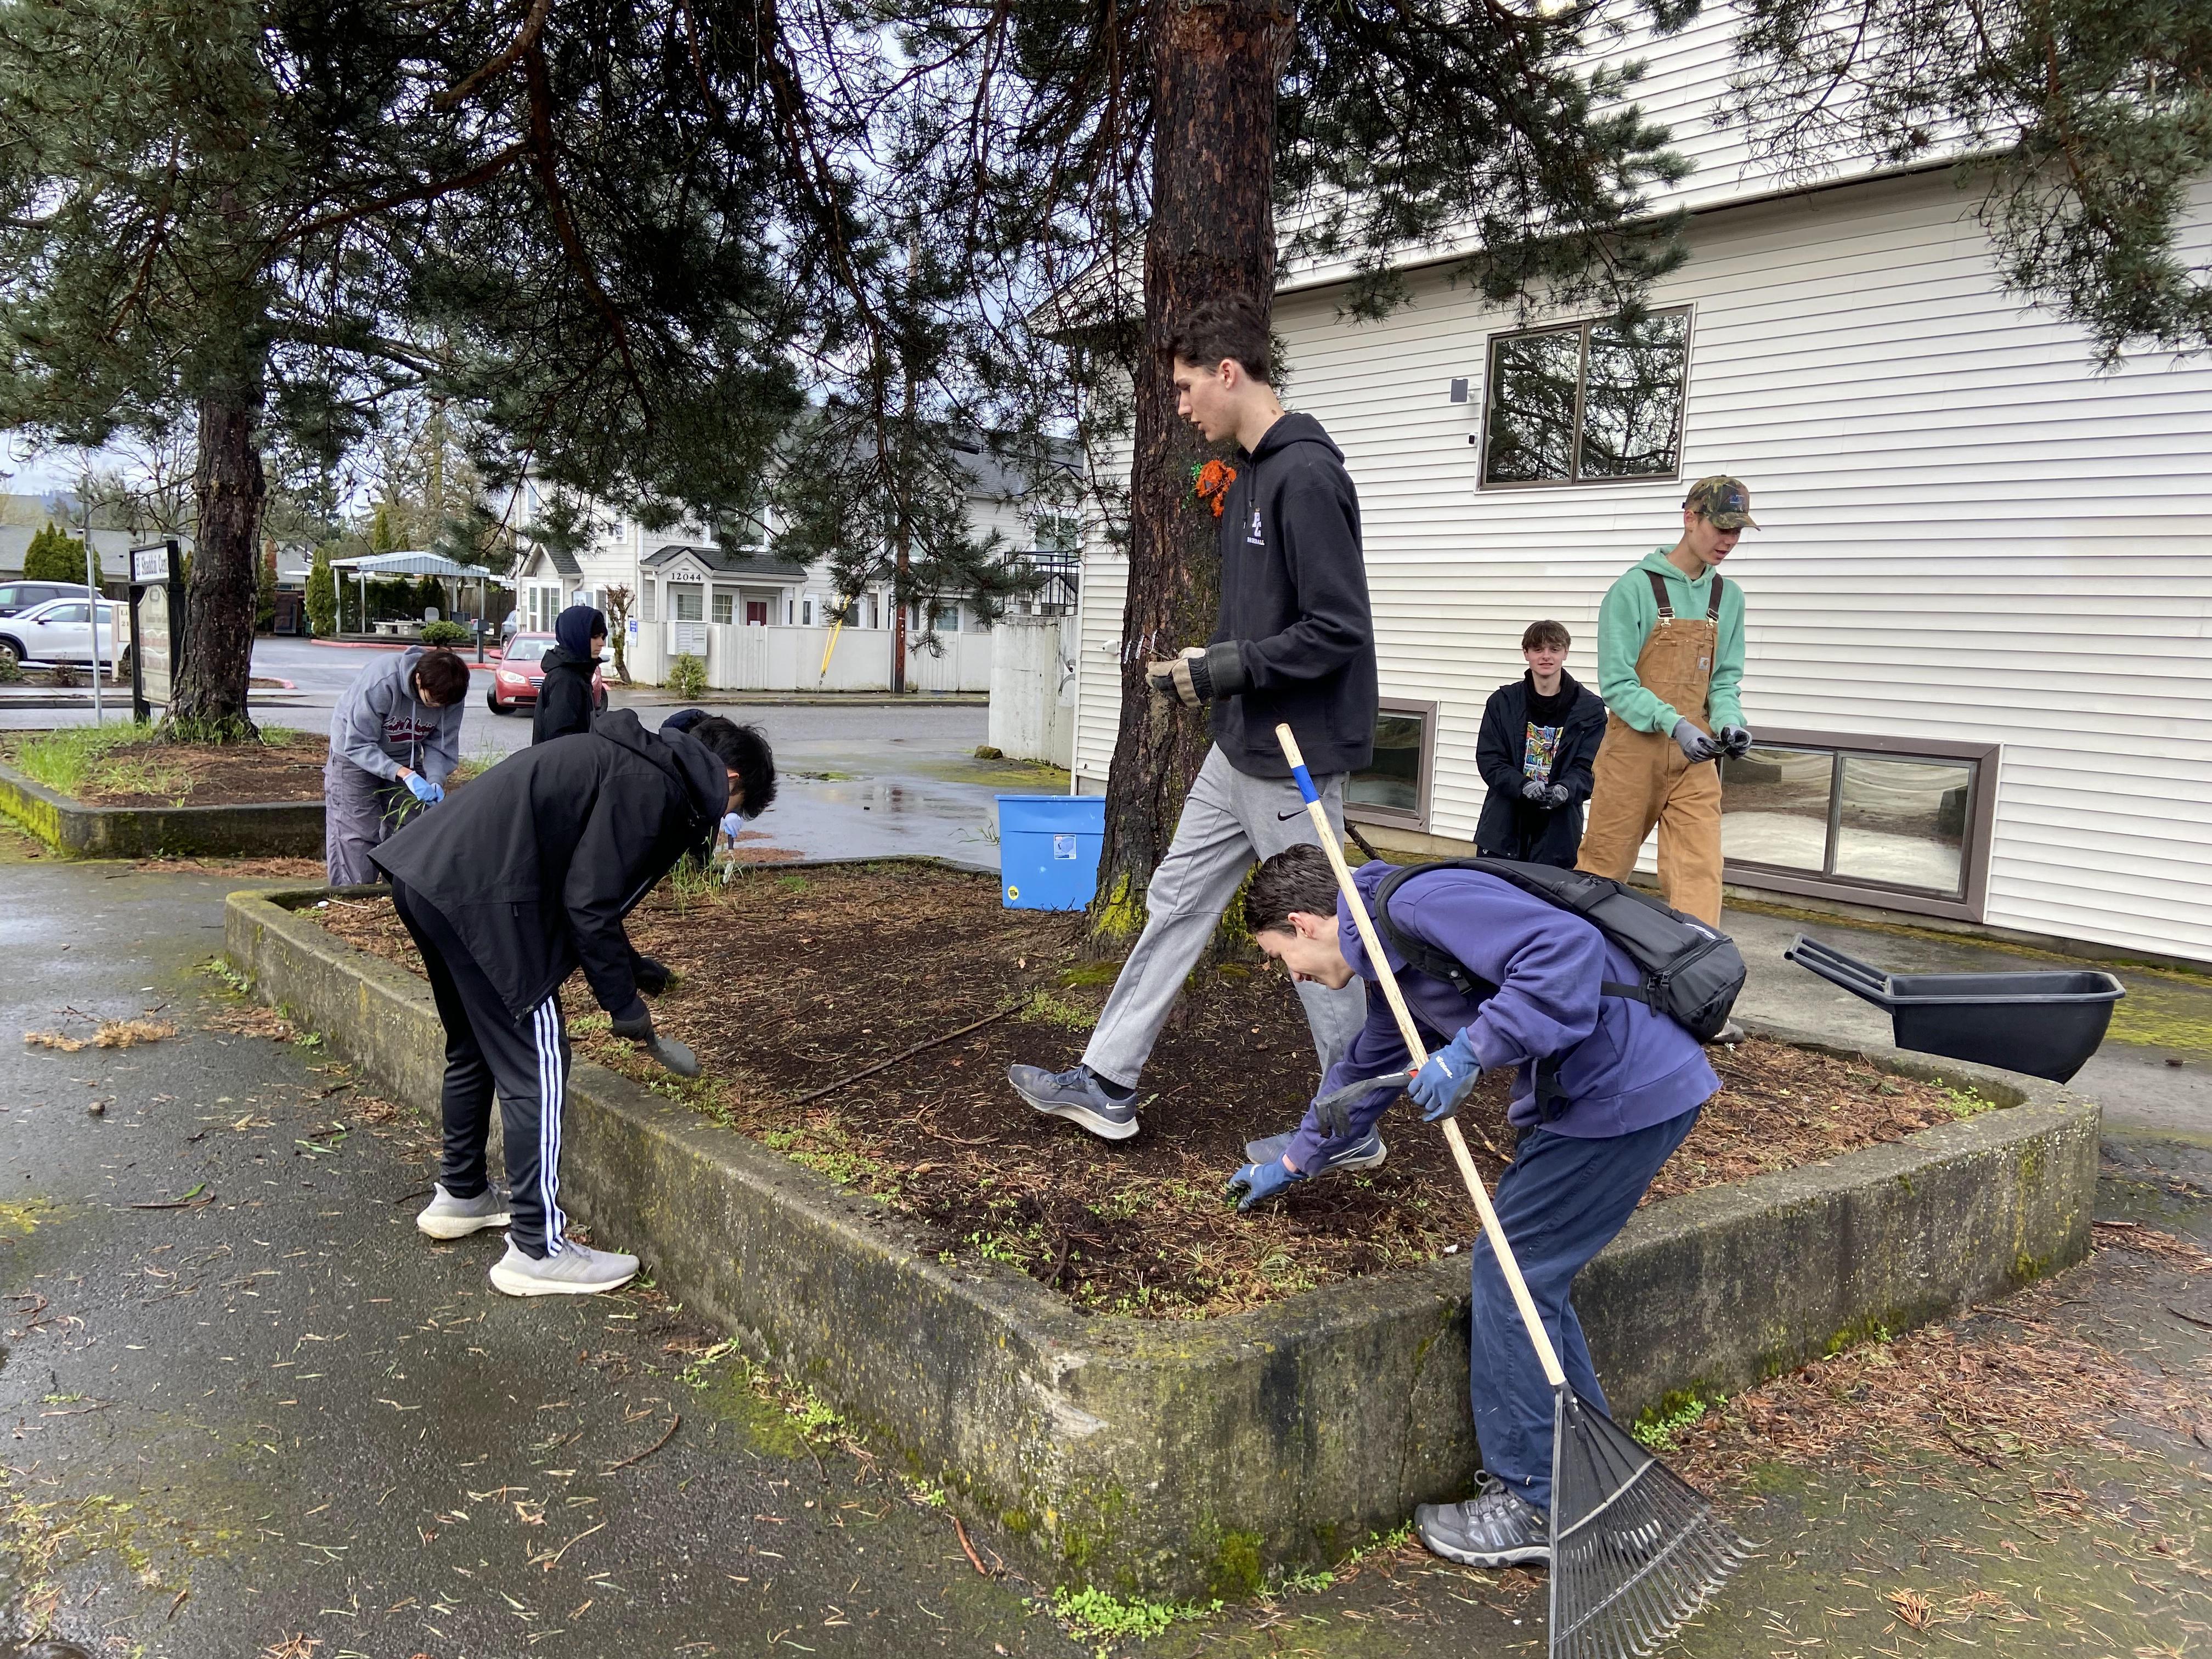 Students working at Compassion Connect